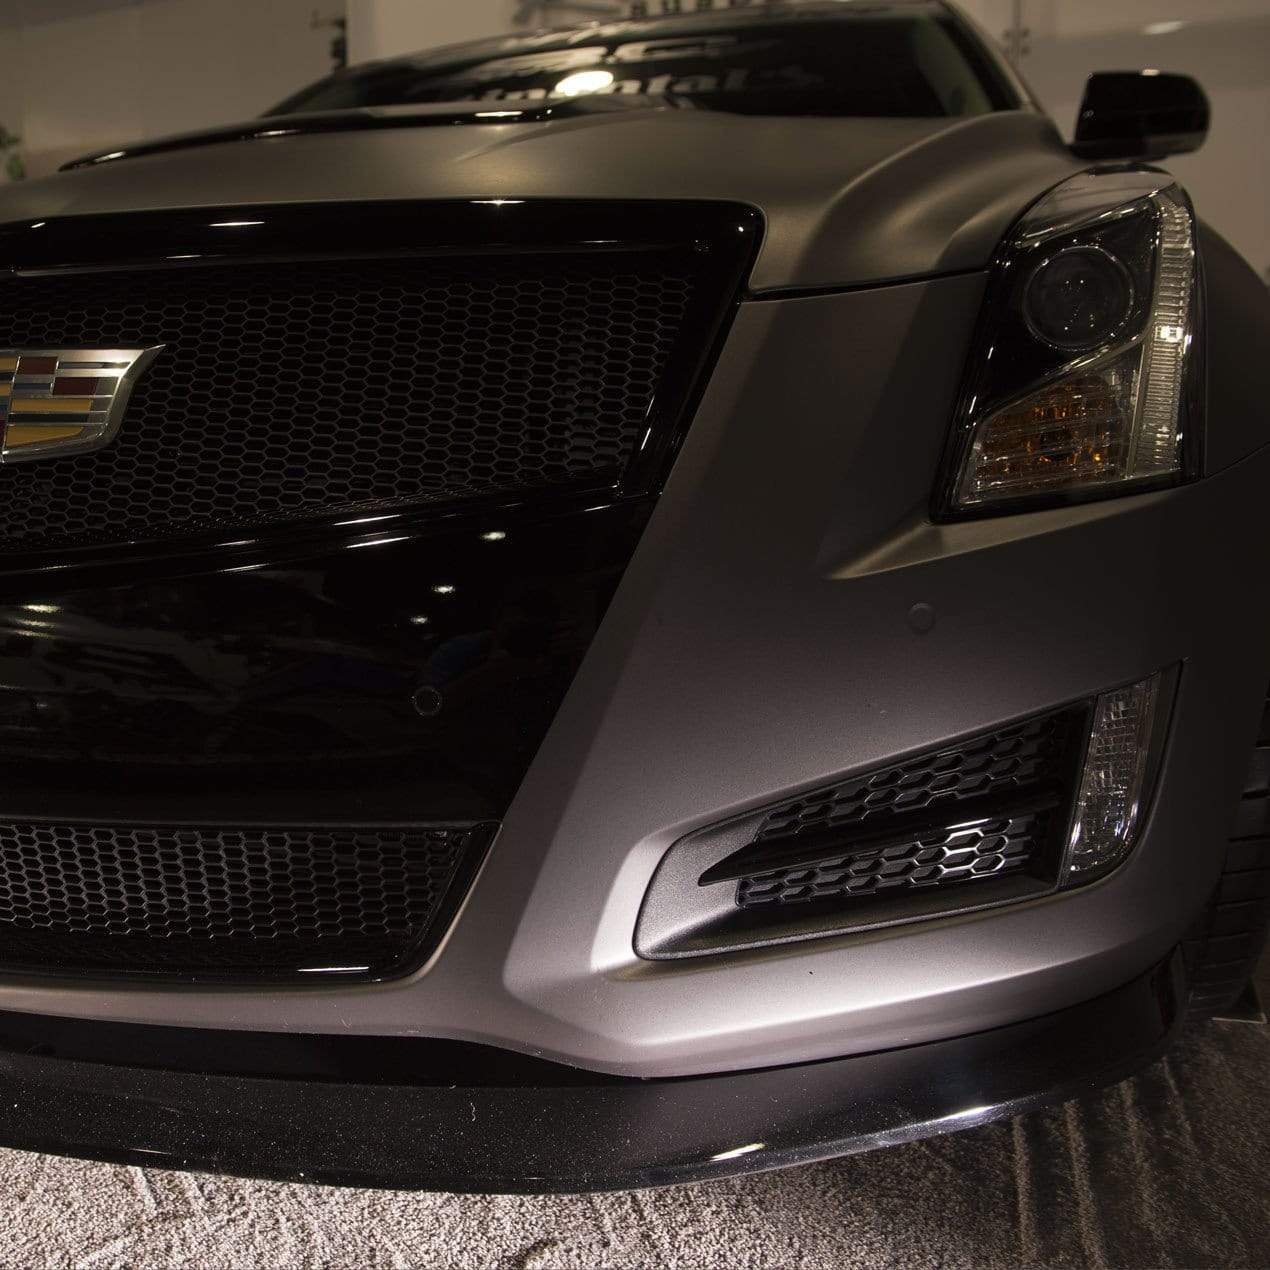 ACS Composite Front Splitter for Cadillac ATS [44-4-001]SBK - Aerodynamic and fuel-efficient upgrade for your vehicle